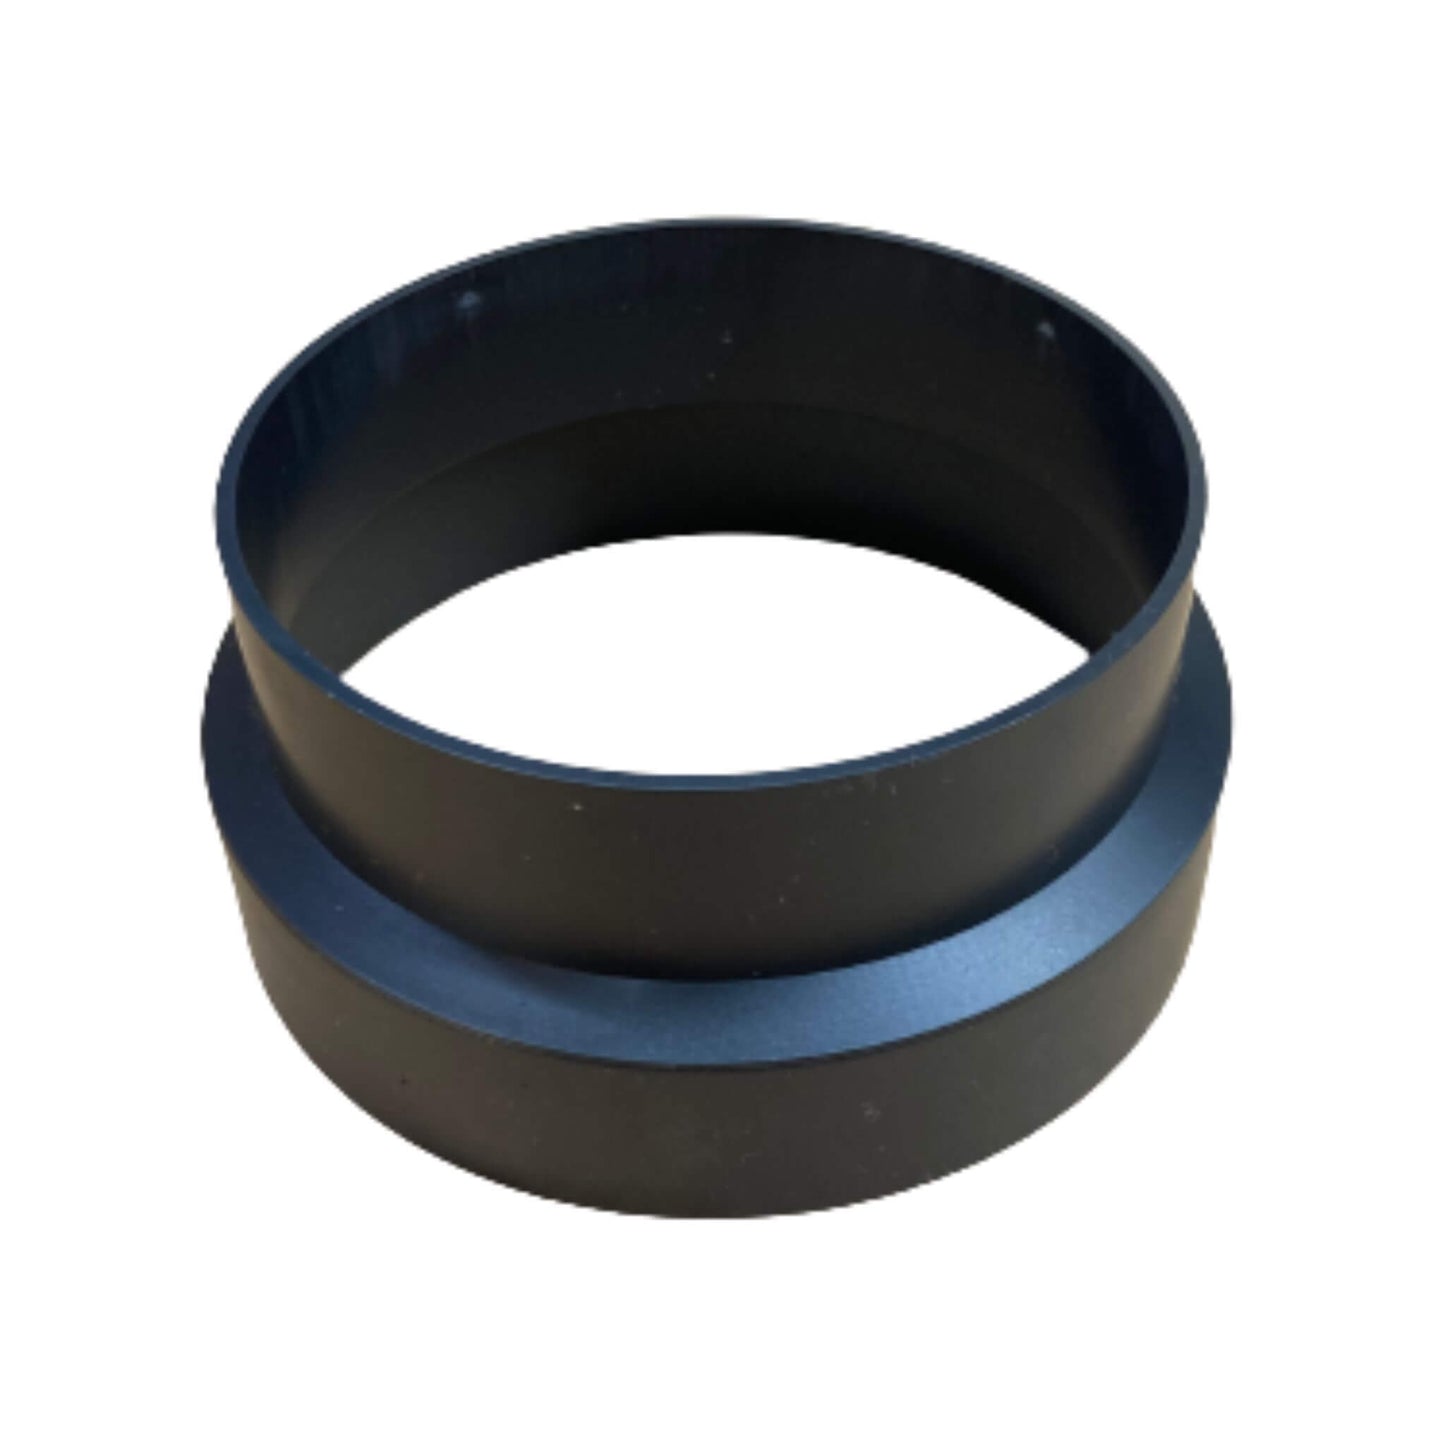 110mm to 100mm Reducer for Roof Tile Vent Adaptor and Flexible Pipe - Beddoes Products